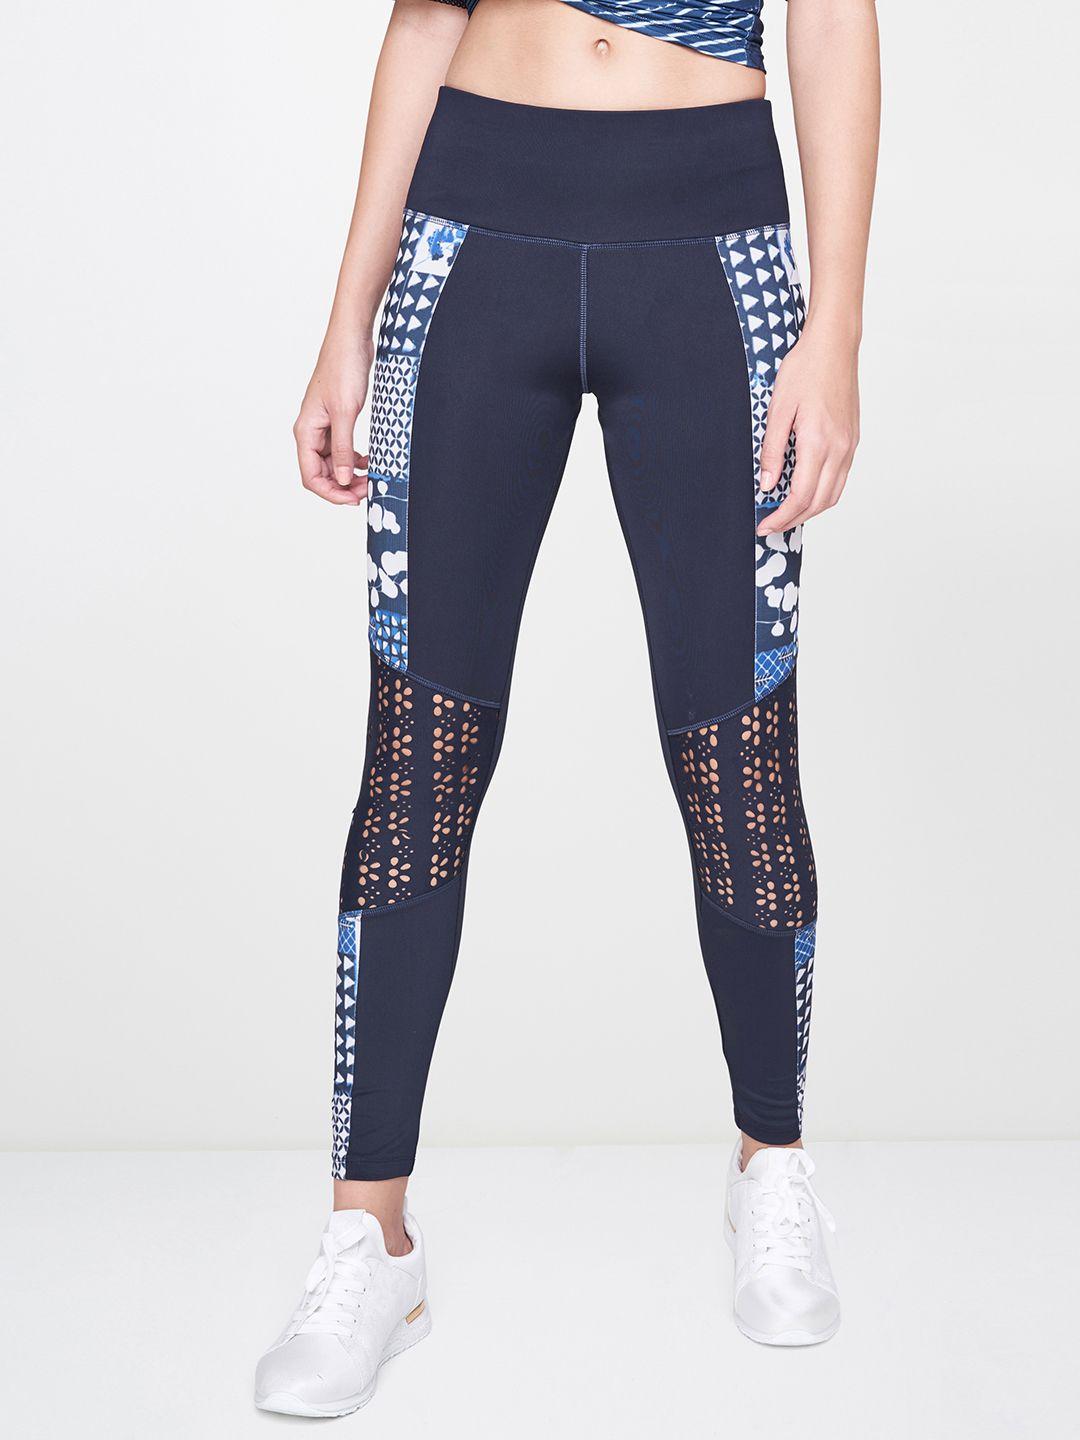 and women navy blue & white printed activewear tights